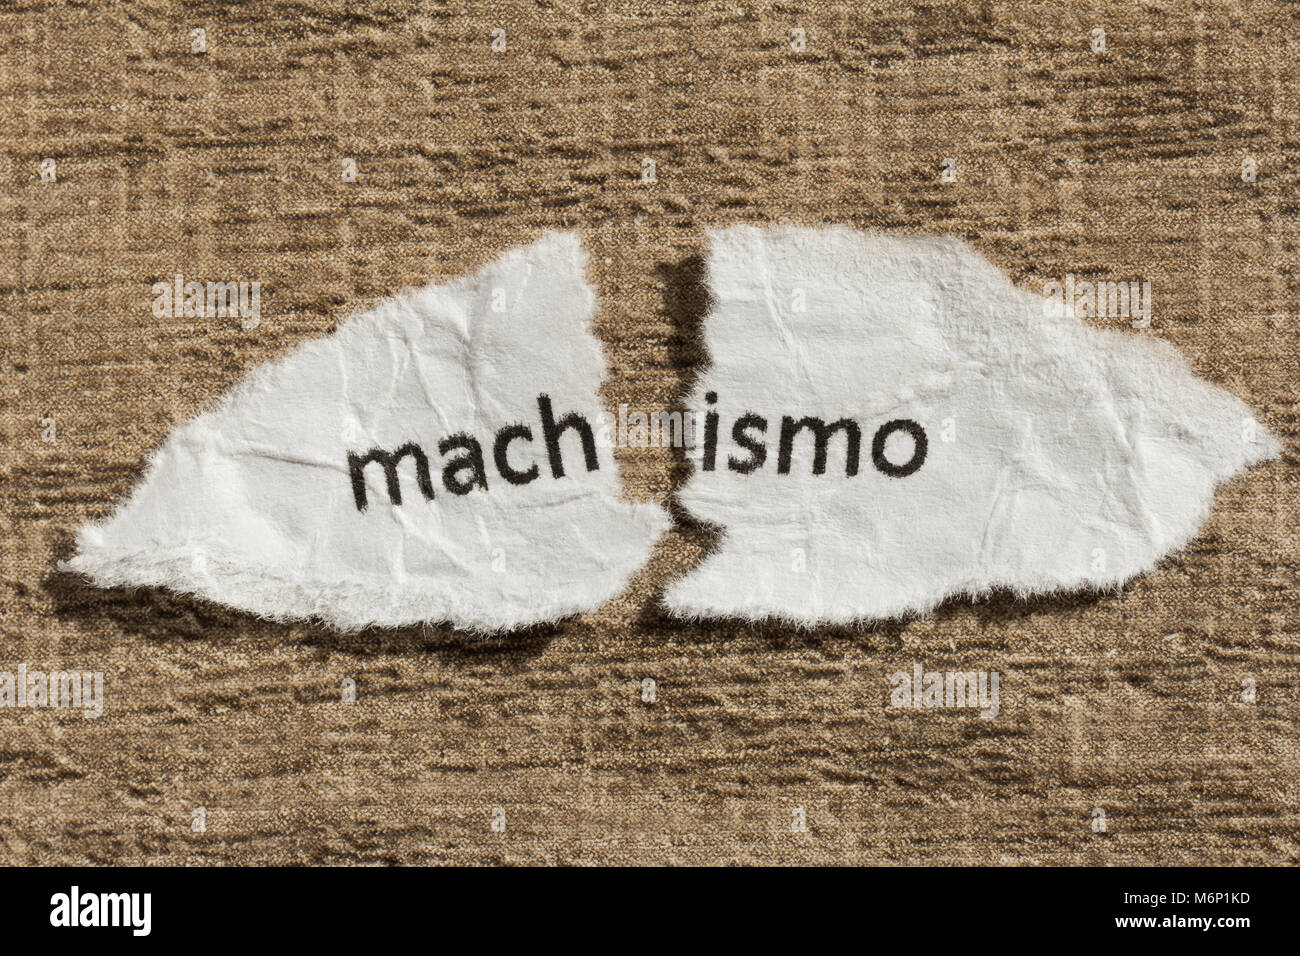 Torn paper written machismo, portuguese and spanish word for chauvism, over wooden background. Old and abandoned idea or practice. Macro photography. Stock Photo